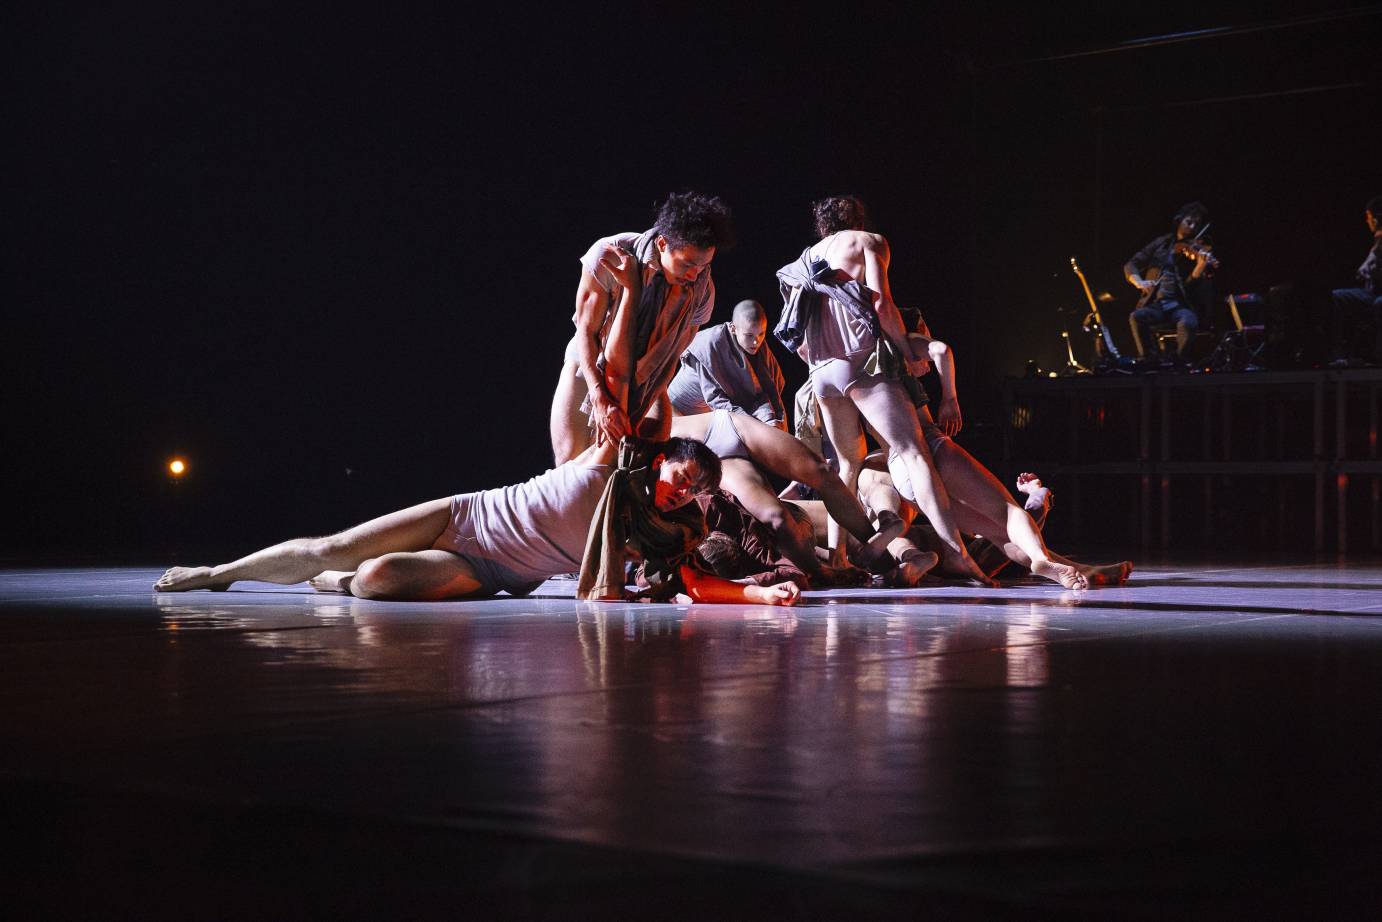 Dancers lie on the stage as two try to help them up